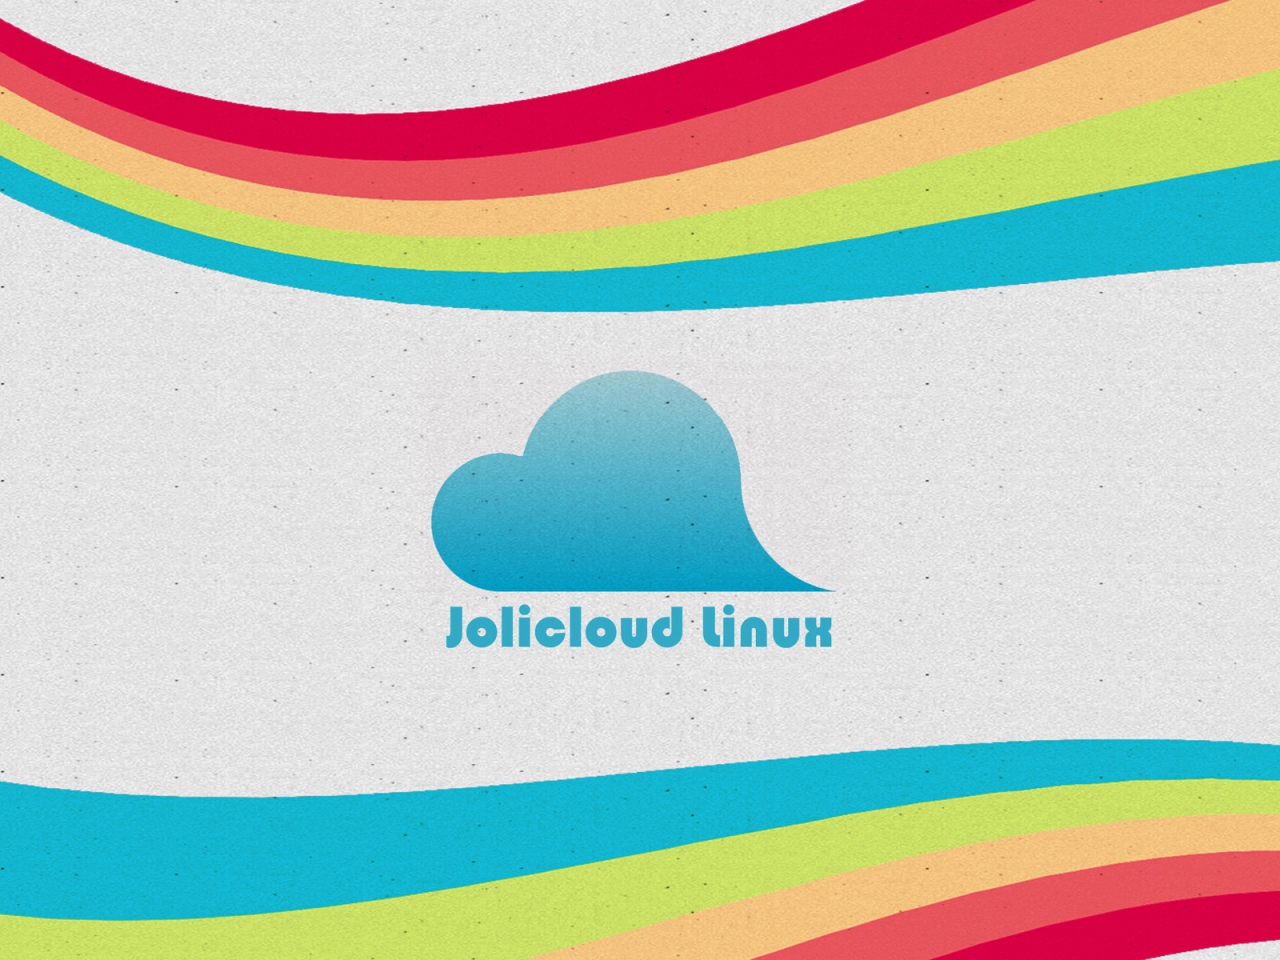 Jolicloud Linux for 1280 x 960 resolution